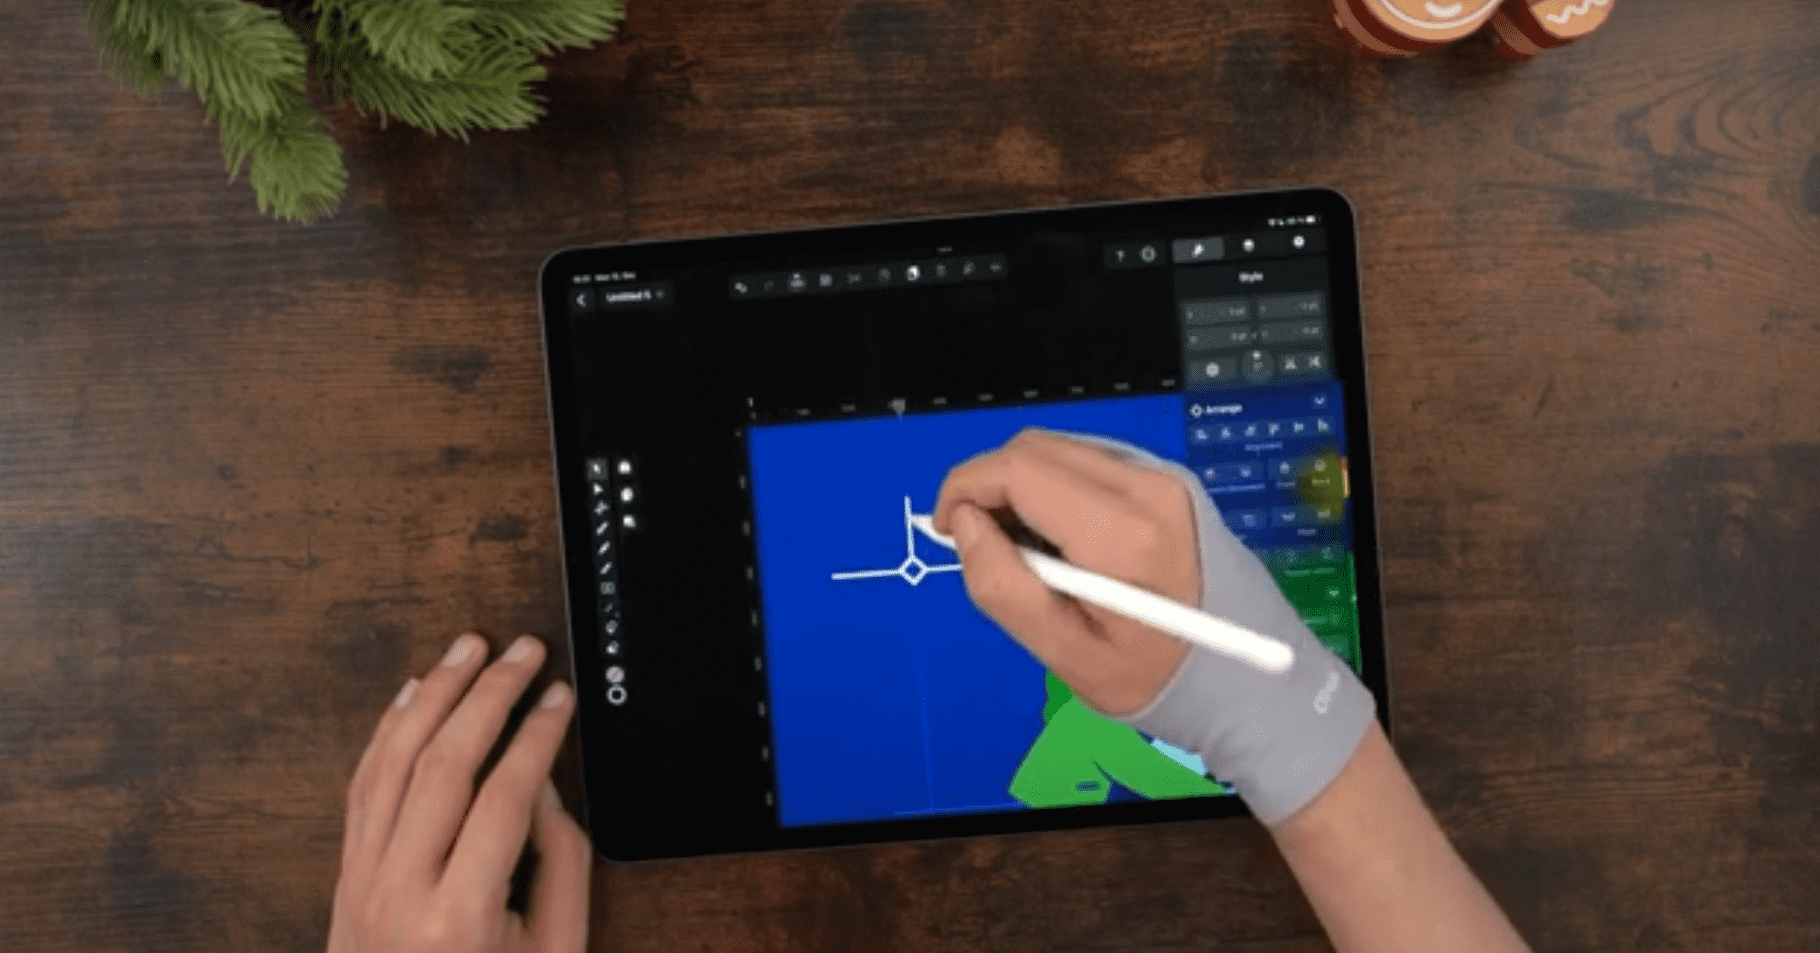 Male hands drawing on an iPad positioned on a wooden table